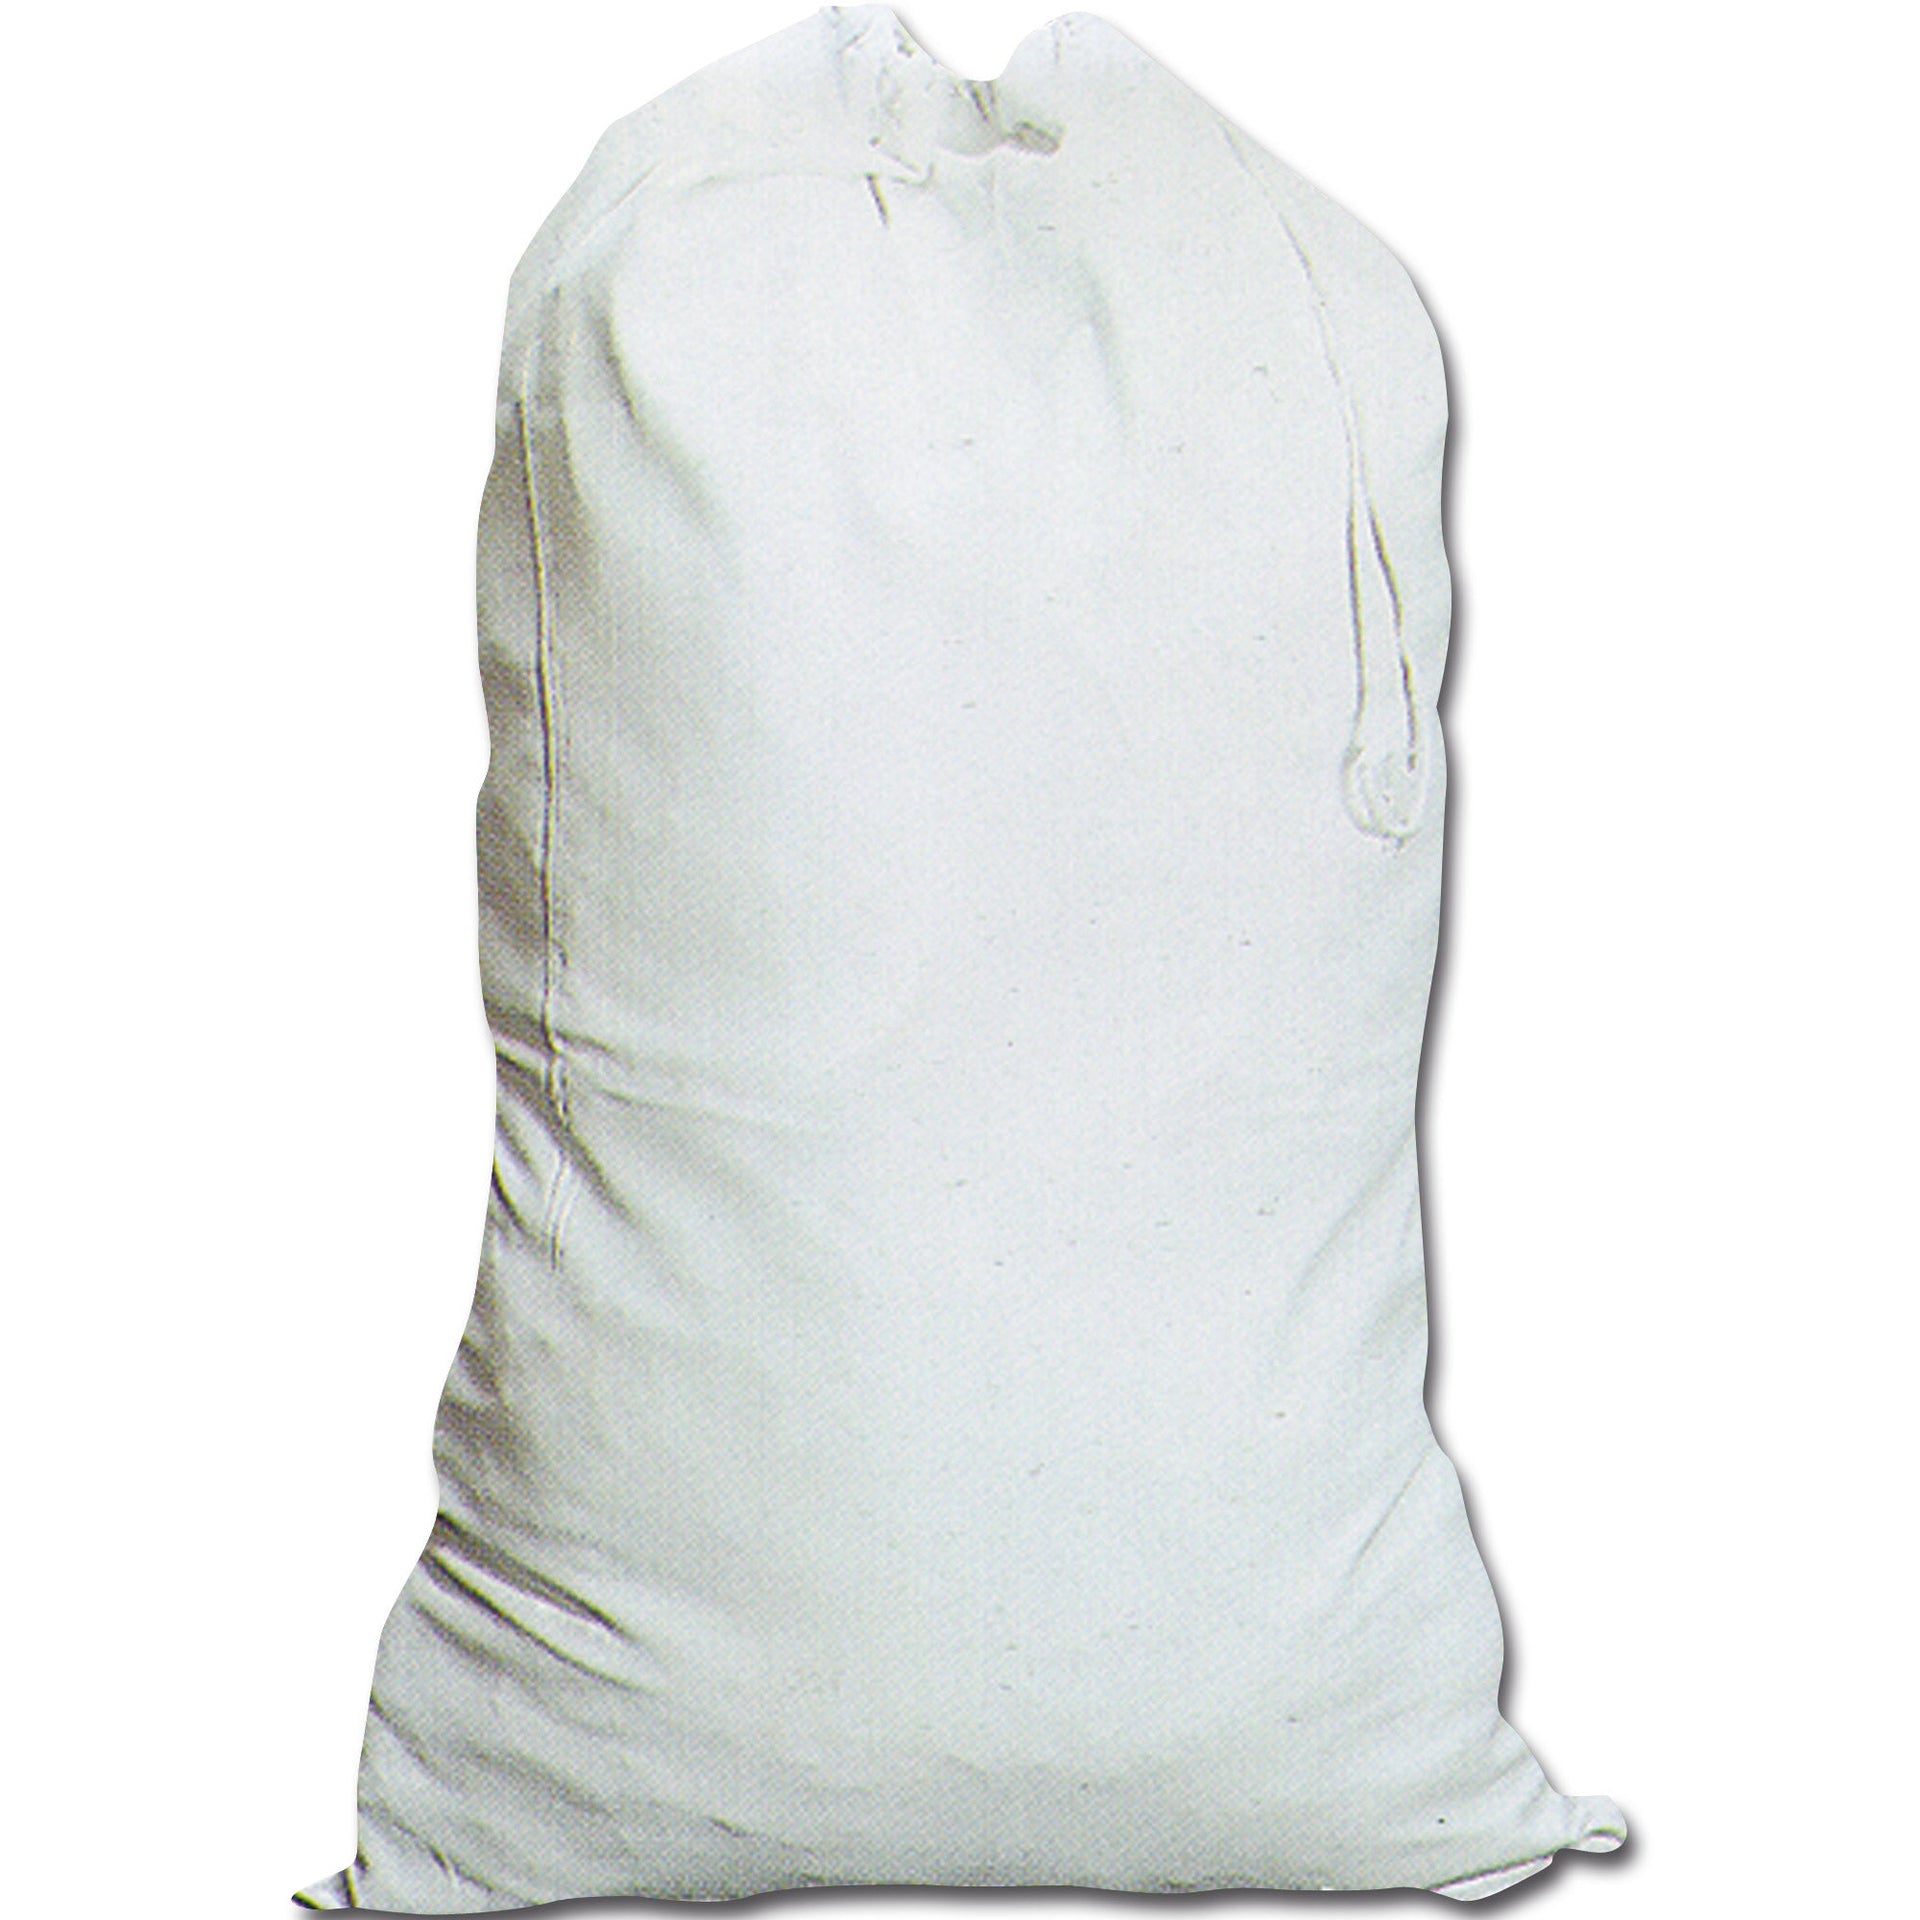 Army Laundry Bag  used